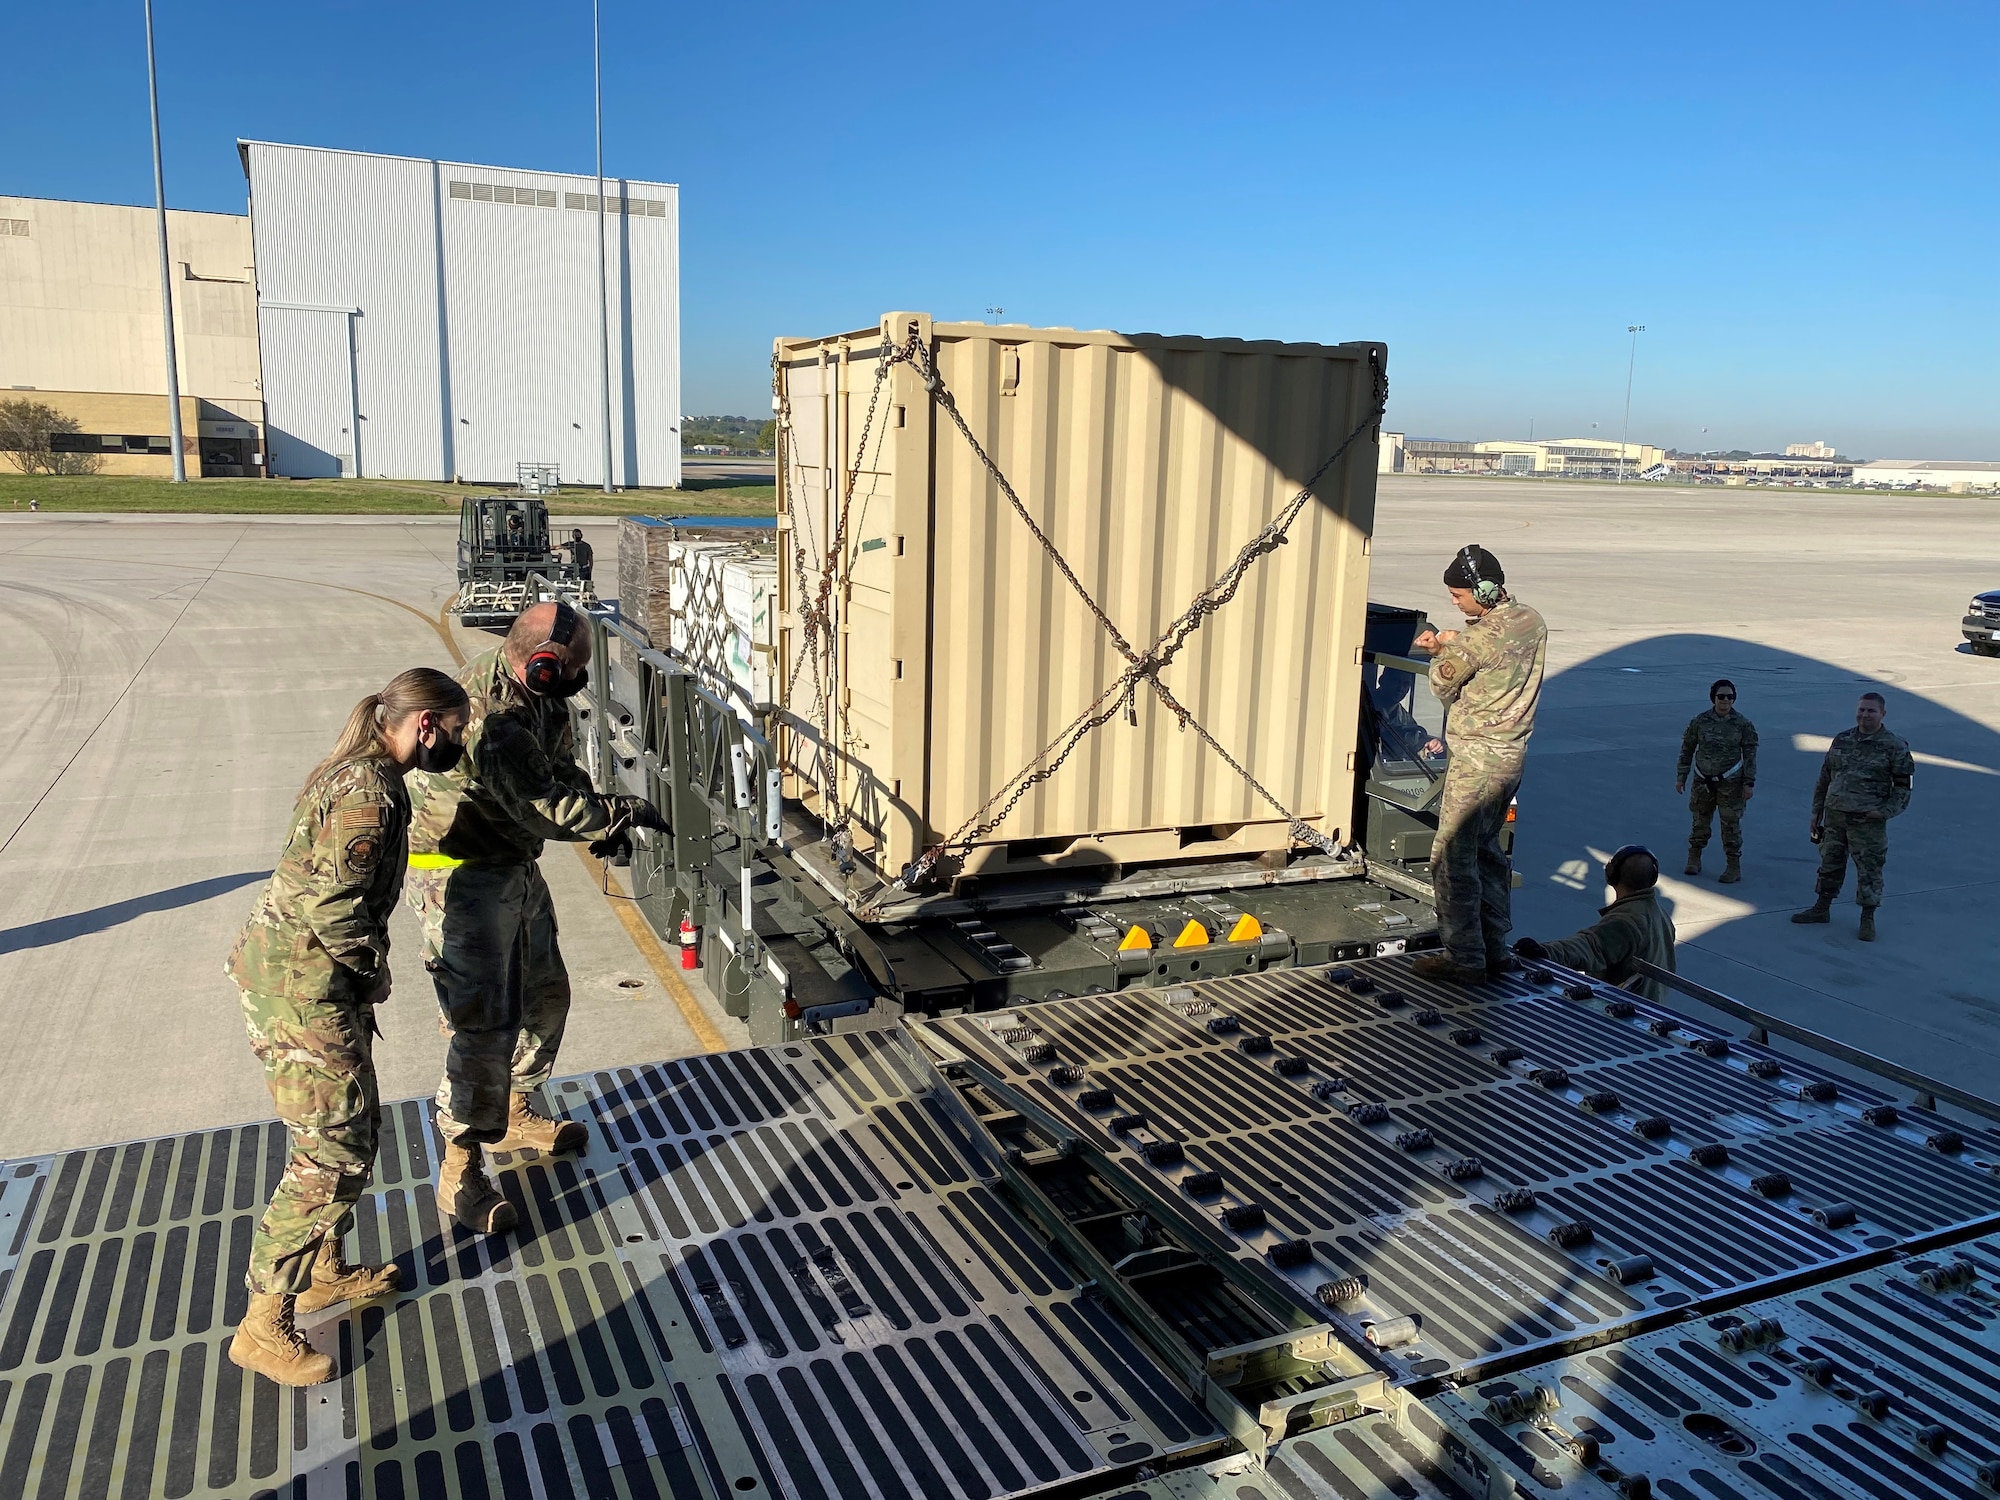 Reserve Citizen Airmen prepare to push an ISU-90 cargo container into the cargo area of a C-5M Super Galaxy aircraft Nov. 7, 2021 at Joint Base San Antonio-Lackland, Texas. This activity was part of a multi-unit cargo preparation and loading training event. (Courtesy photo by Tech. Sgt. John Shue)